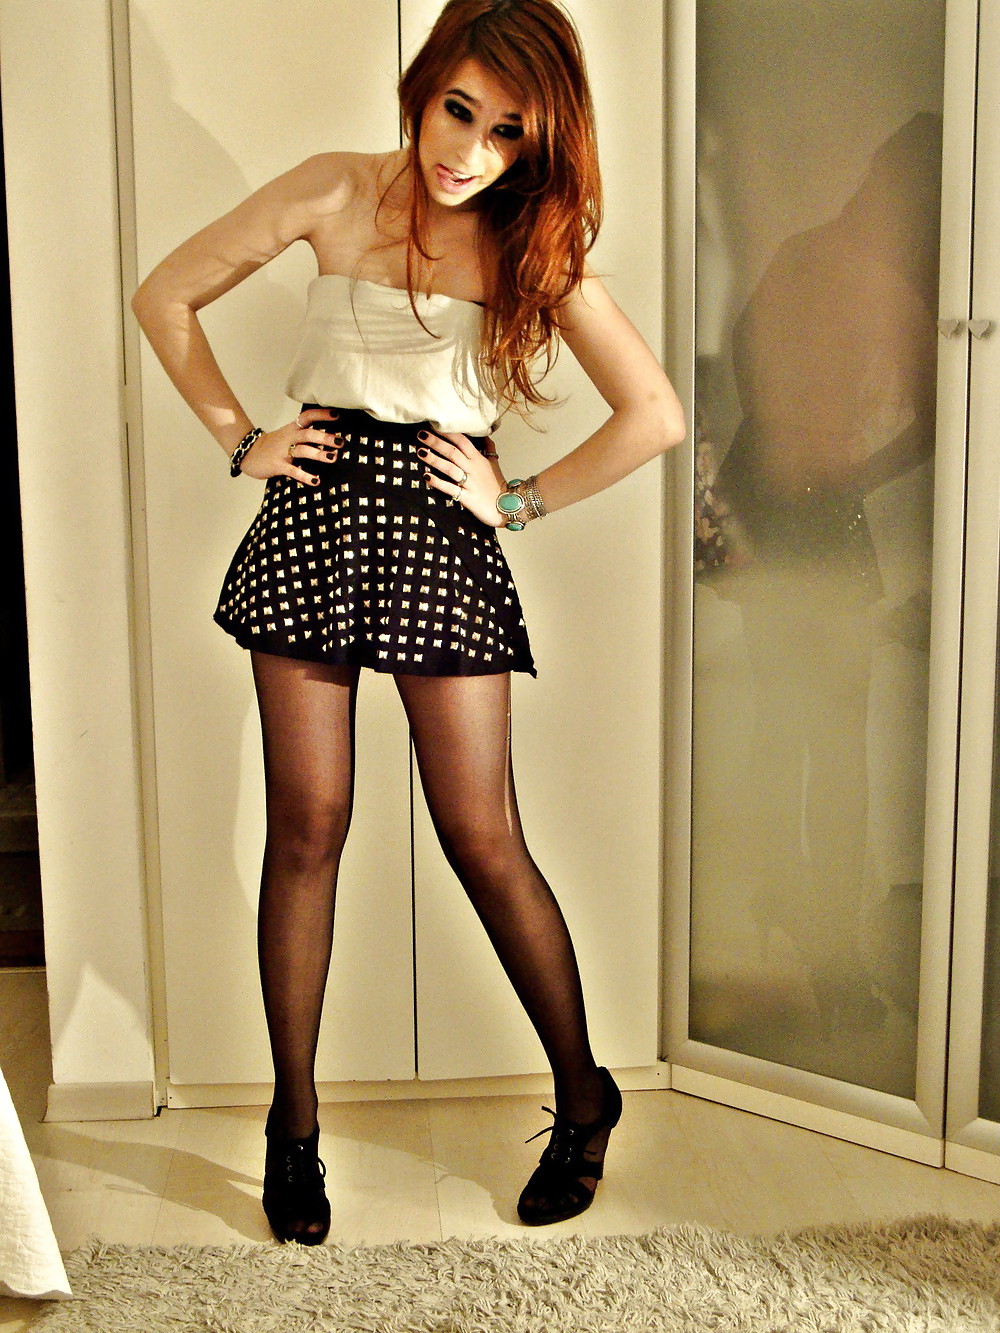 Hot teen redhead hipster in tights pantyhose #25309519